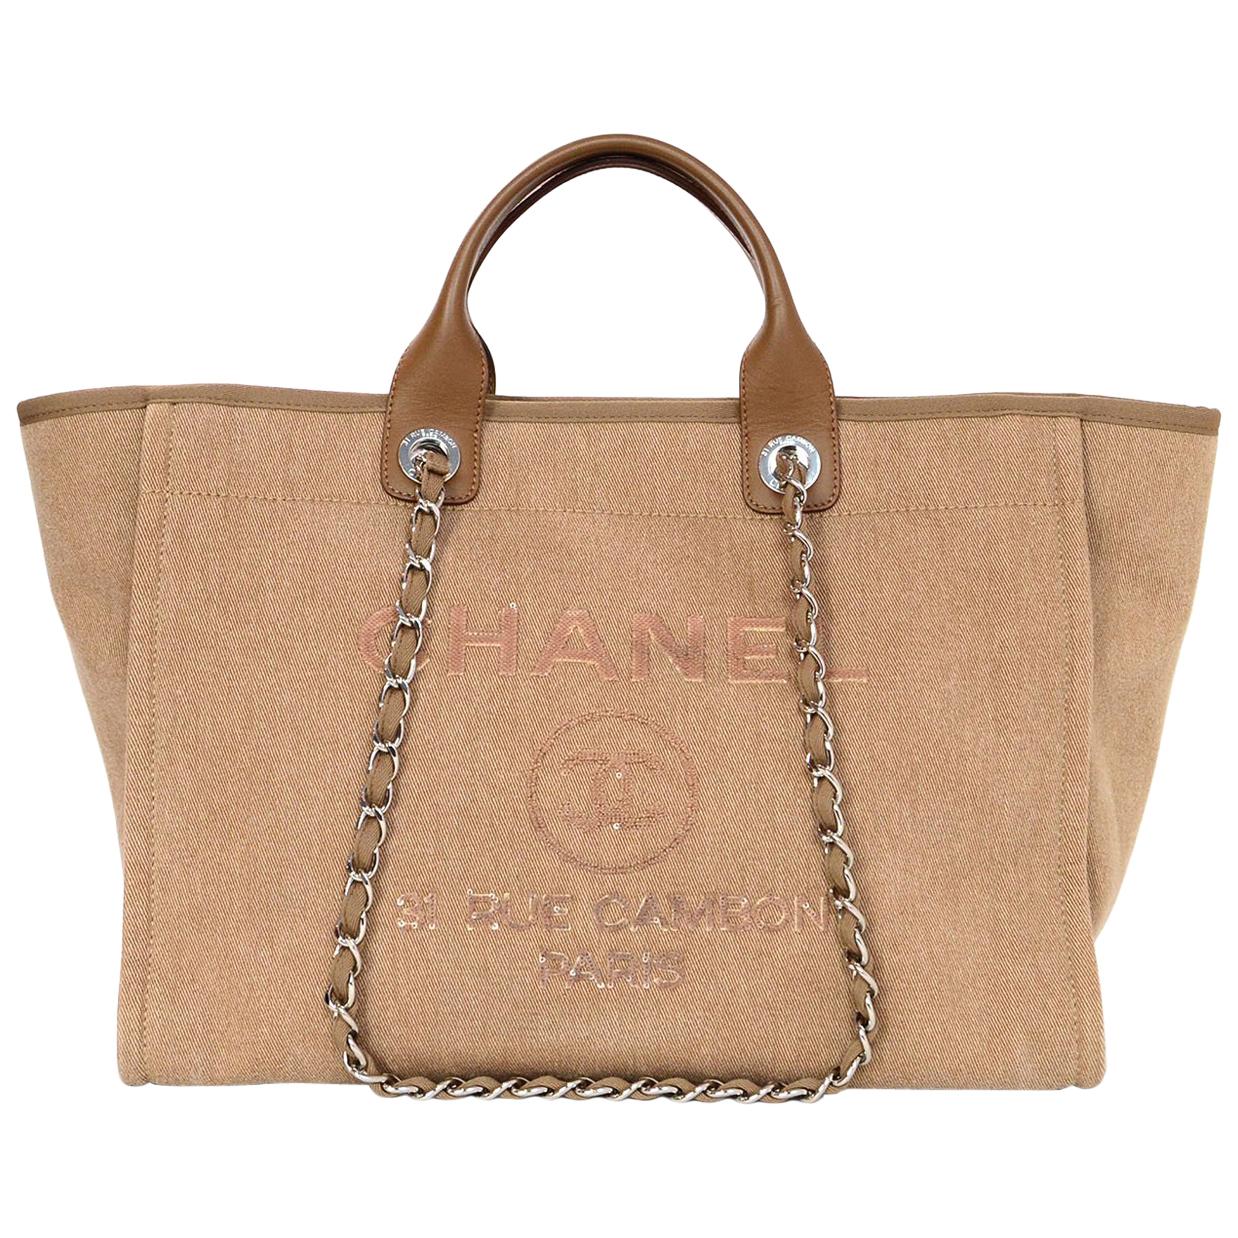 Chanel Tan Canvas and Sequin Large Deauville Tote Bag, 2017 